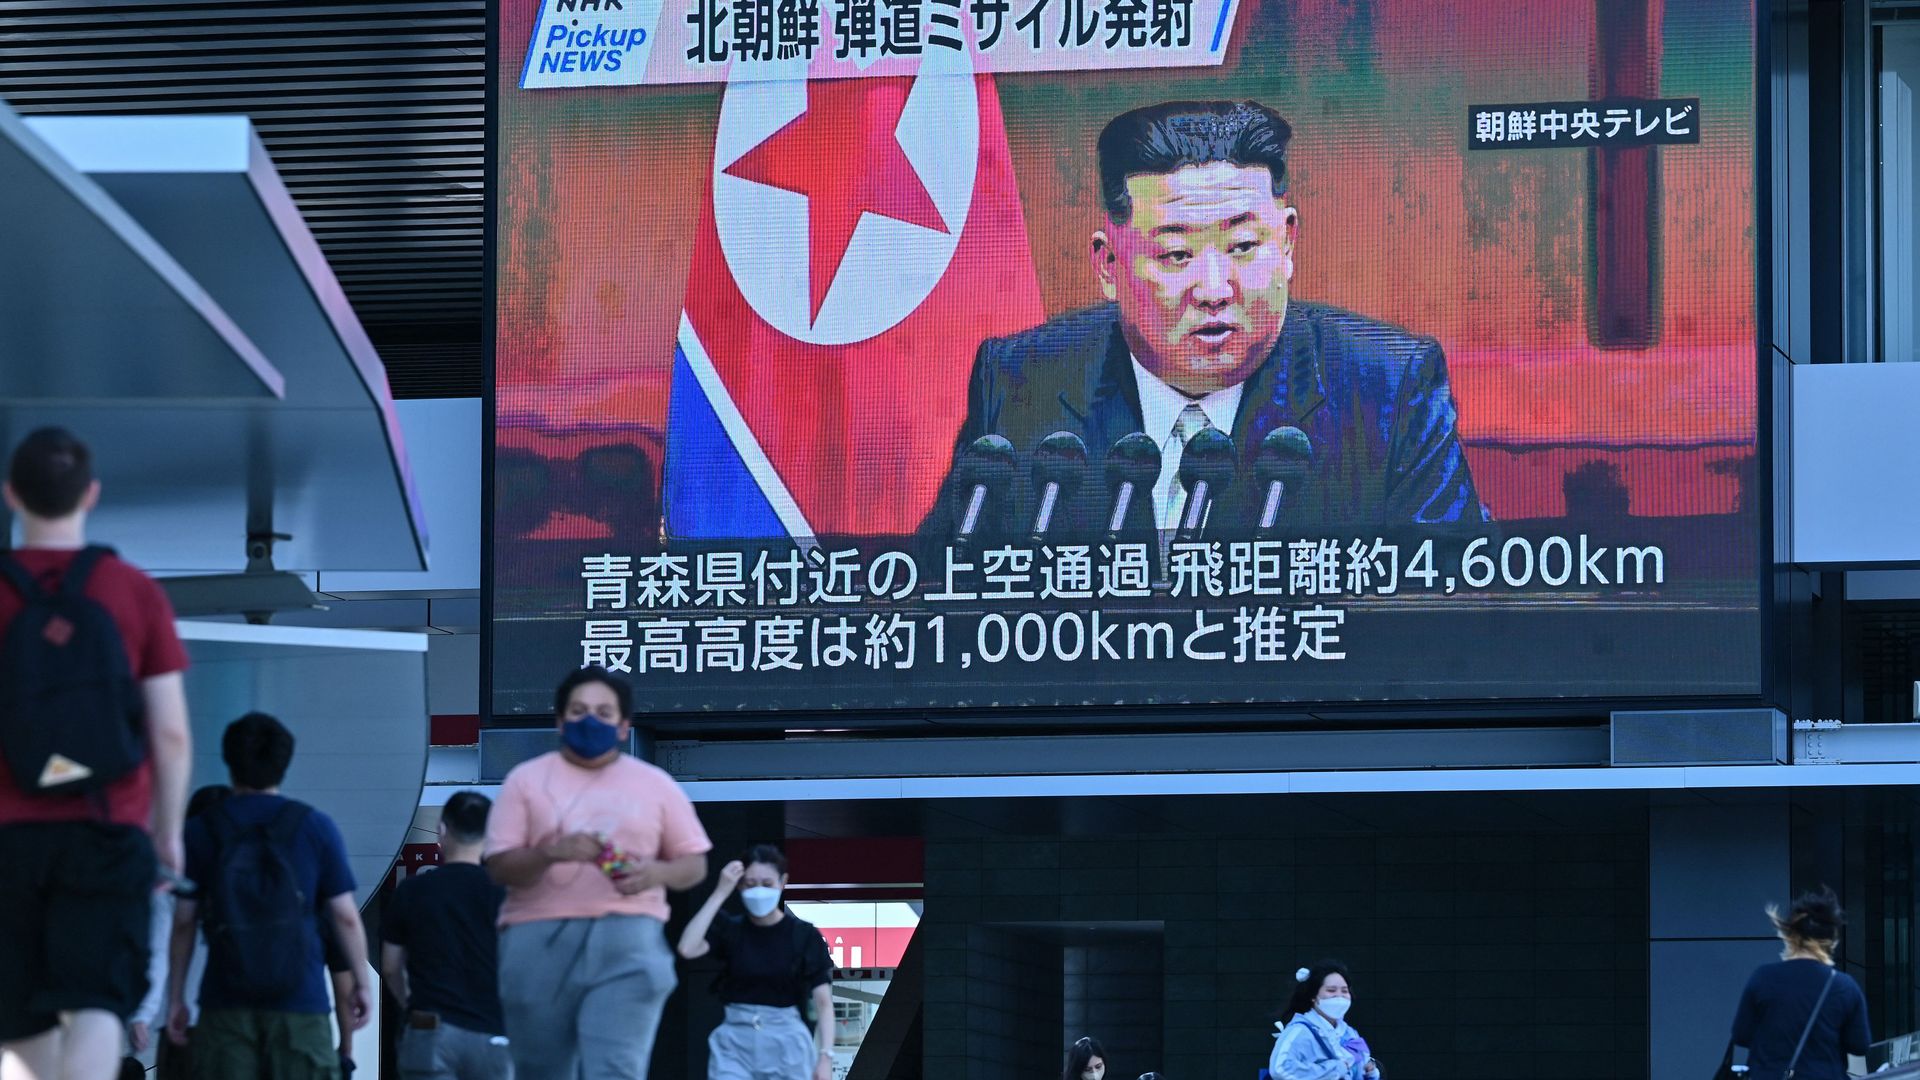 Pedestrians walk under a large creen showing images of North Korea's leader Kim Jong Un  in Tokyo on October 4, 2022, after North Korea launched a missile that flew over Japan.